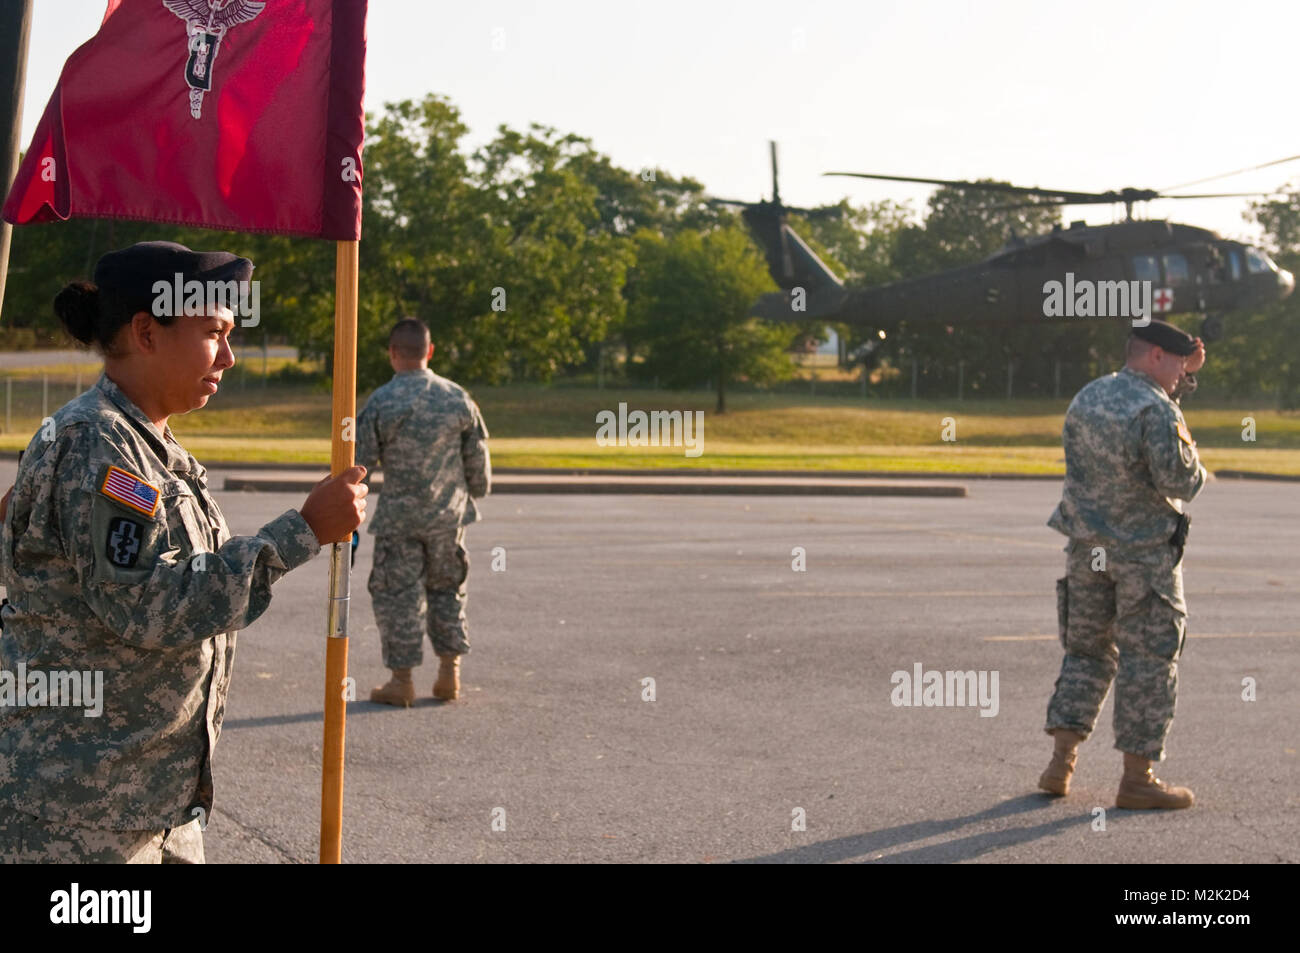 Spc. Brenda Lopez, an Army dental hygenist and a native of Dallas, Texas clings to the guidon of the 965th Dental Company as a UH-60 Blackhawk Helicopter lands nearby.  Lopez is participating in her first official ceremony as an Army Reservist. Hanging onto the Guidon by 807MCDS Stock Photo